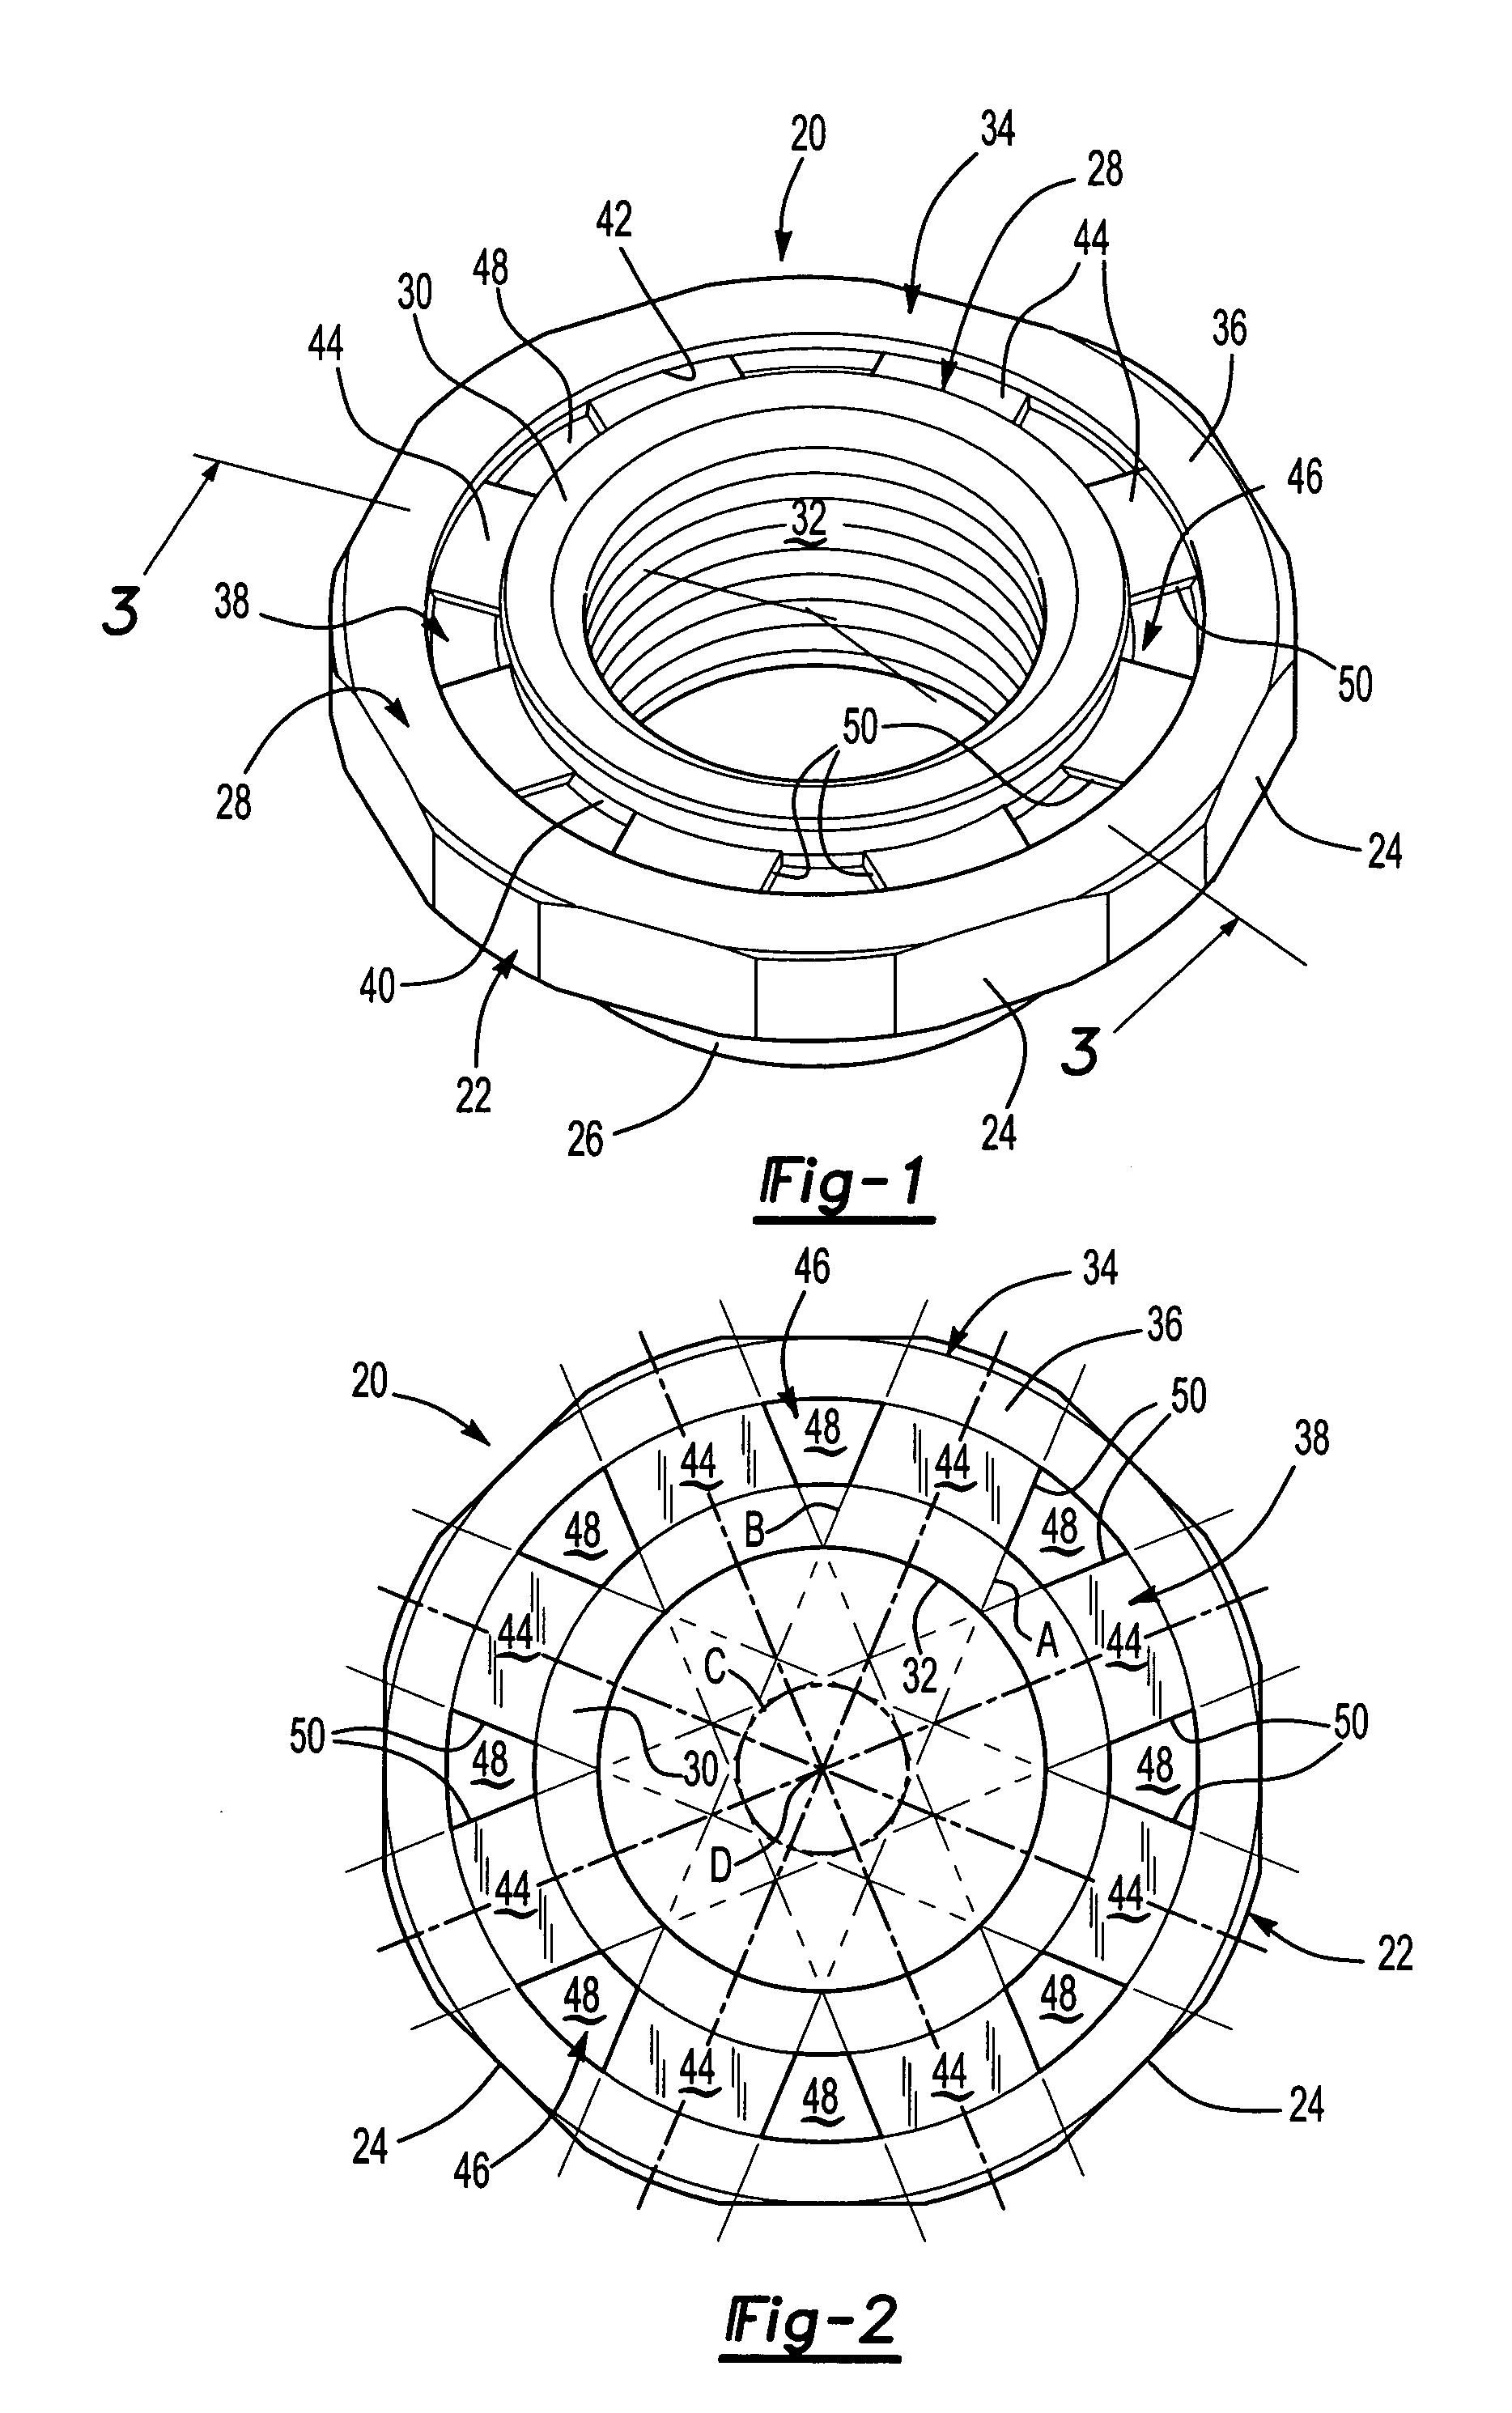 Self-attaching female fastener element, sealed fastener and panel assembly and method of forming same